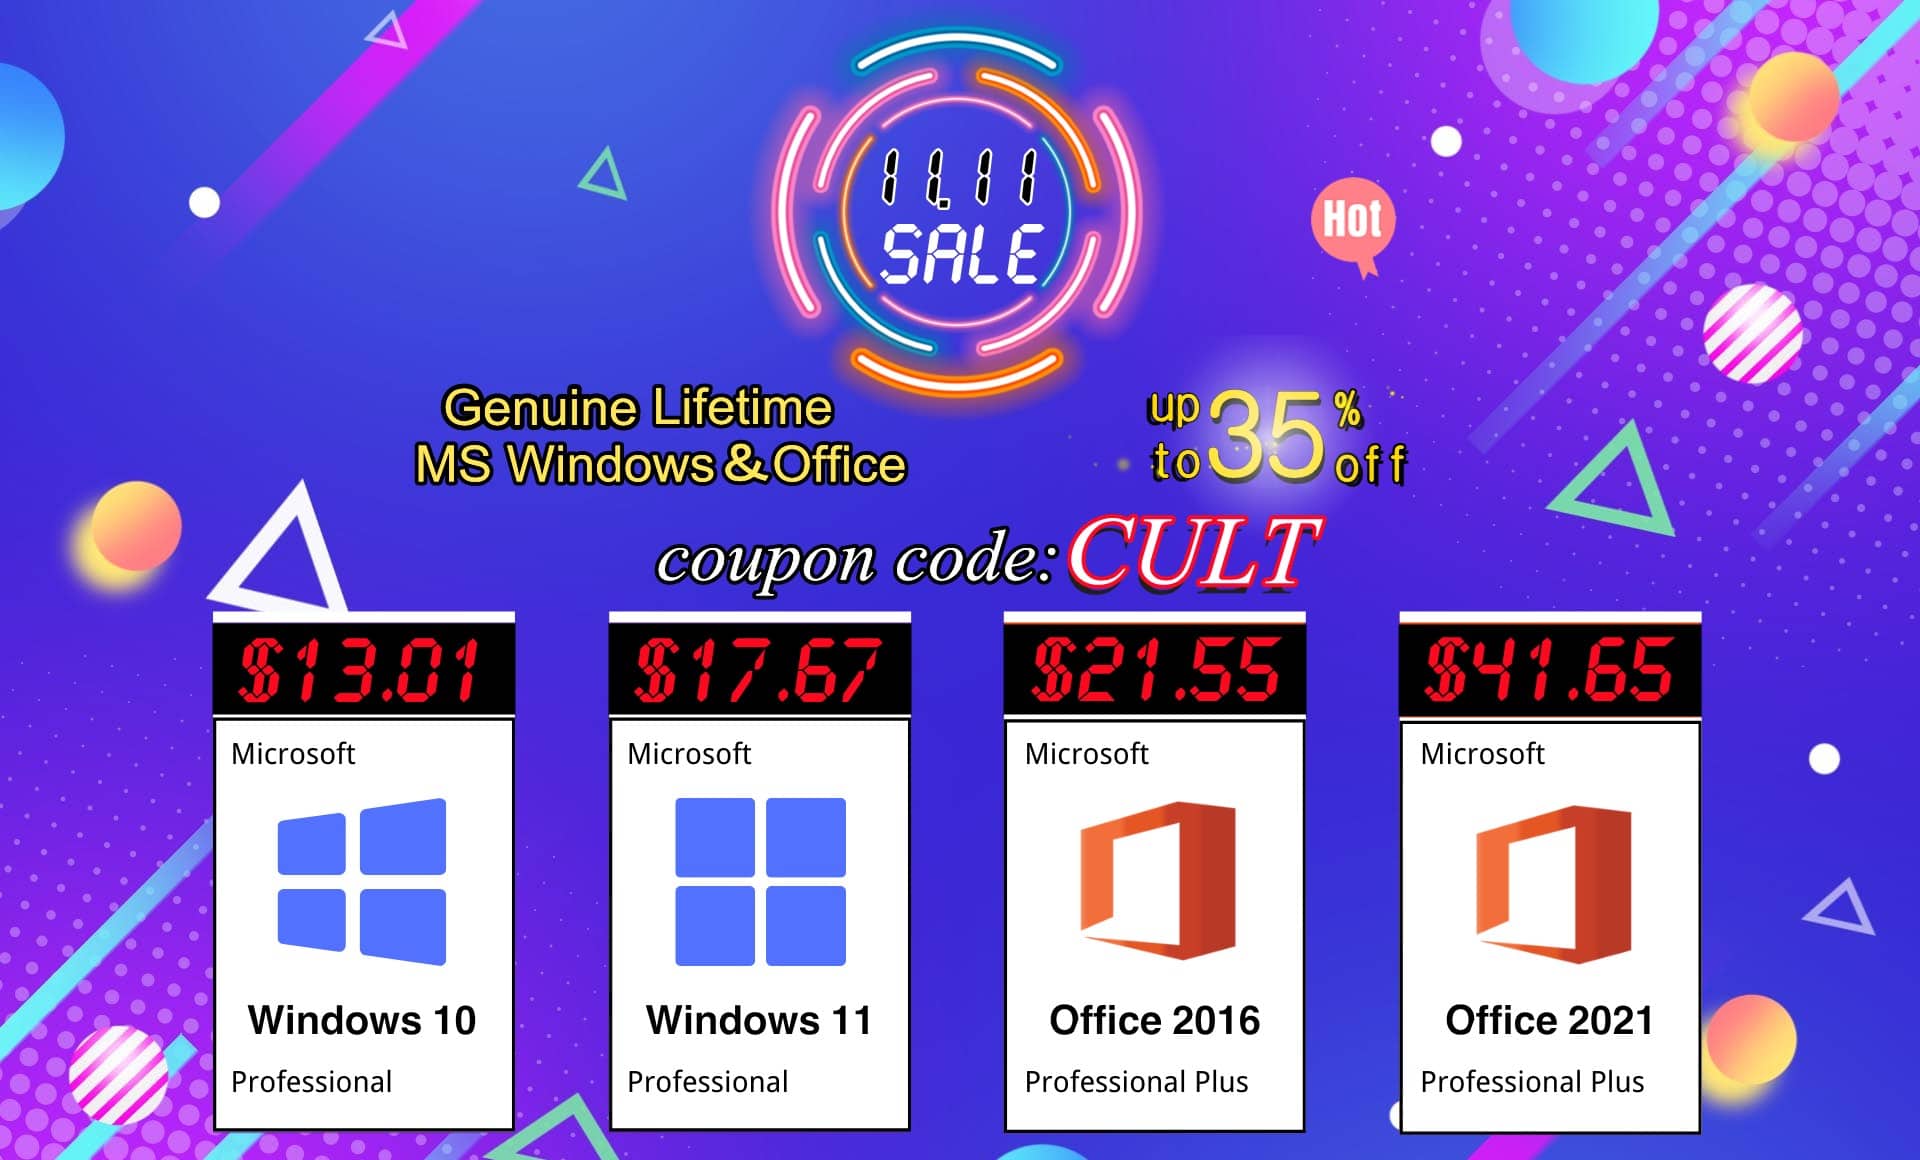 Get 35% off Microsoft Windows and Office software activation keys at CDKeylord.com with code CULT.